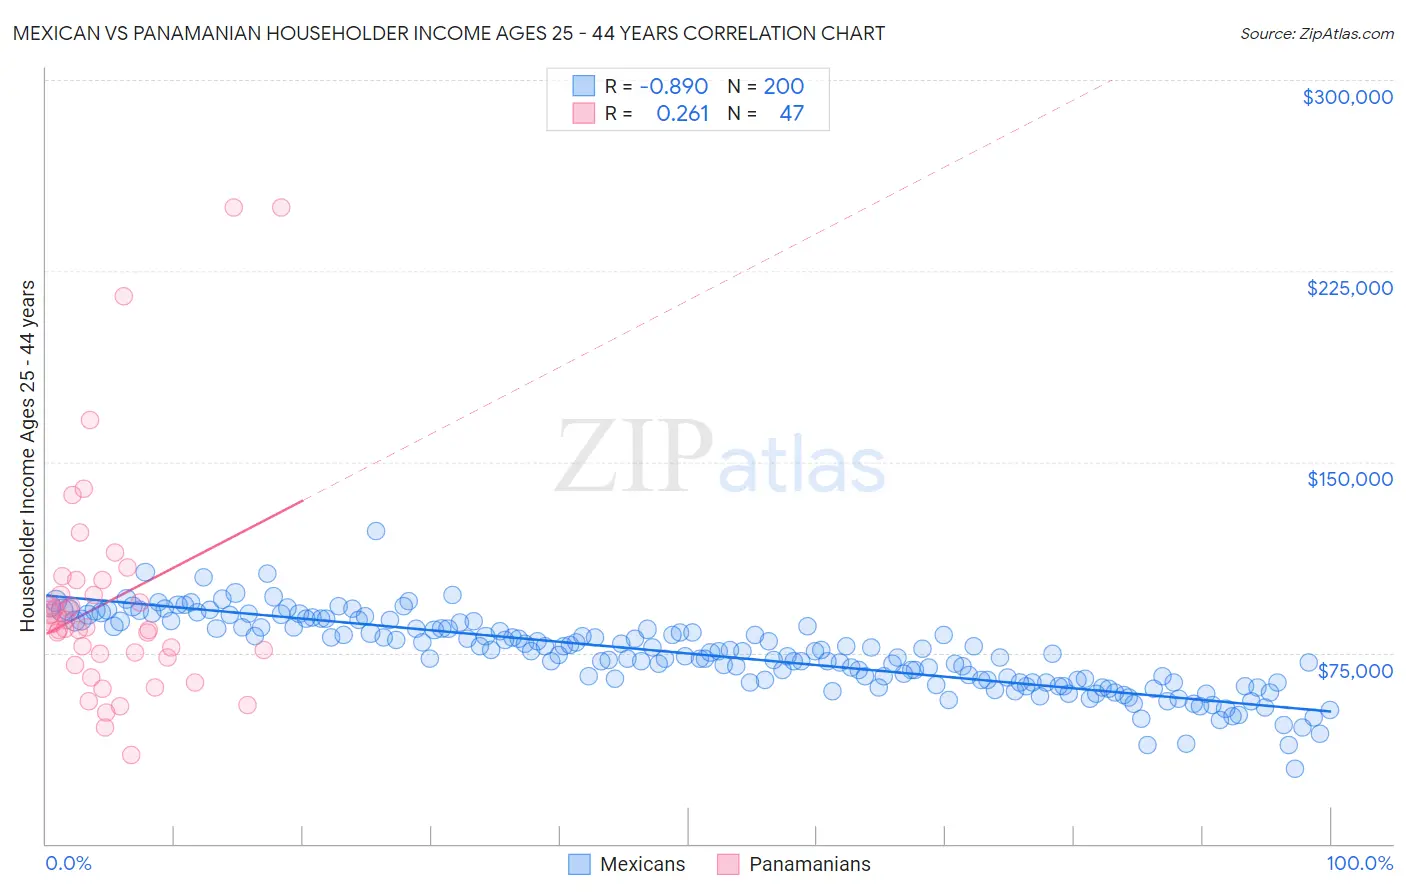 Mexican vs Panamanian Householder Income Ages 25 - 44 years